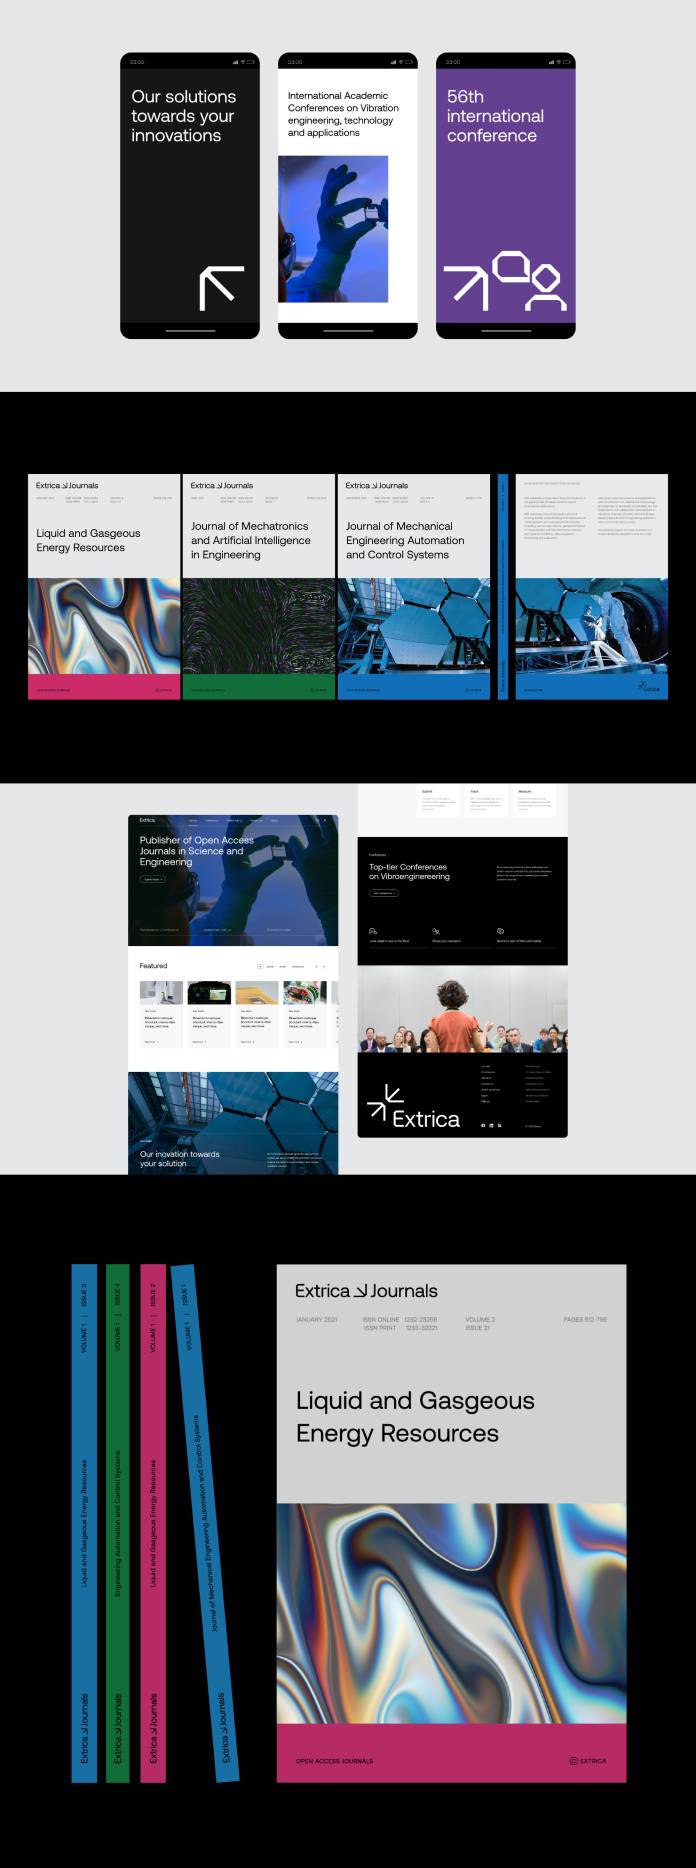 Extrica rebrand by Andstudio